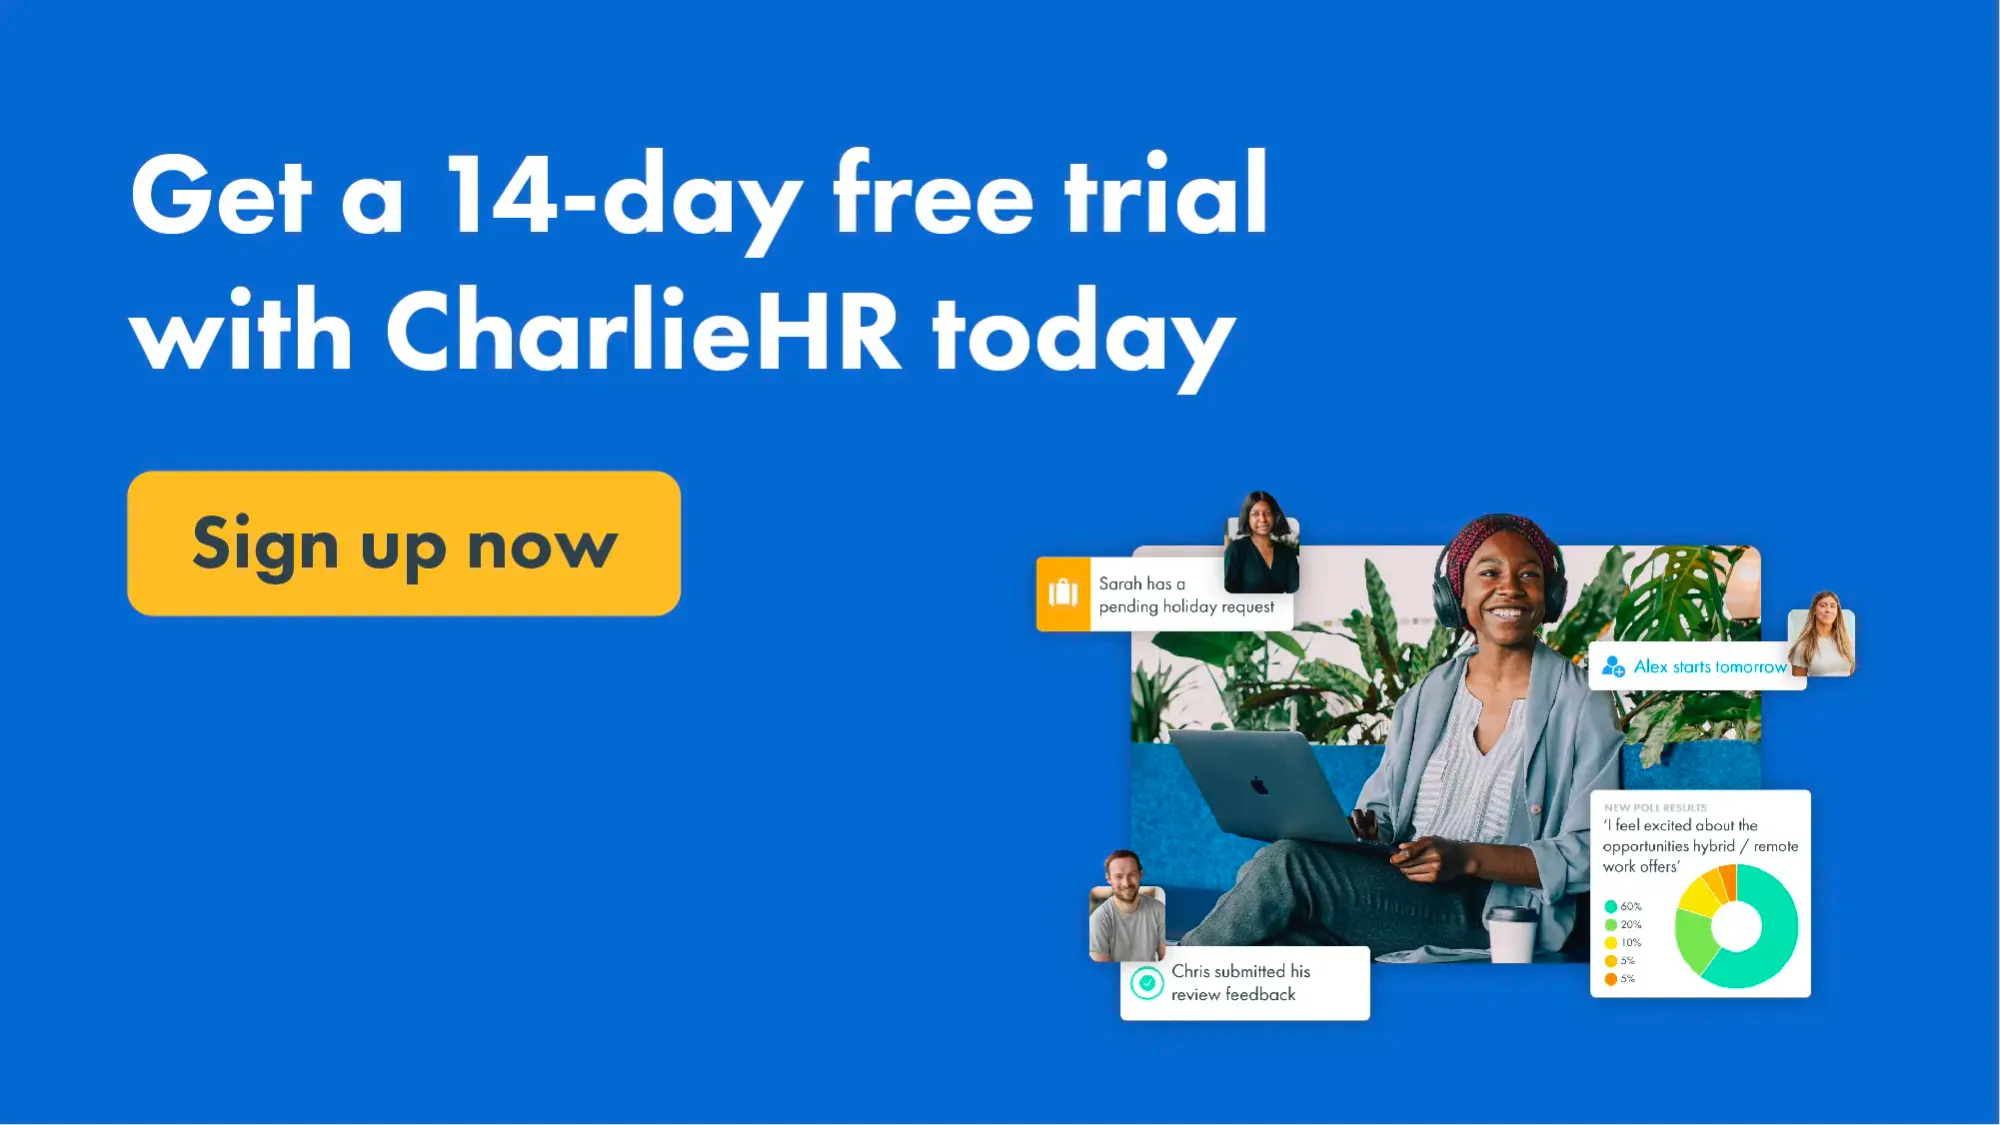 Click here to start a 14-day free trial with CharlieHR